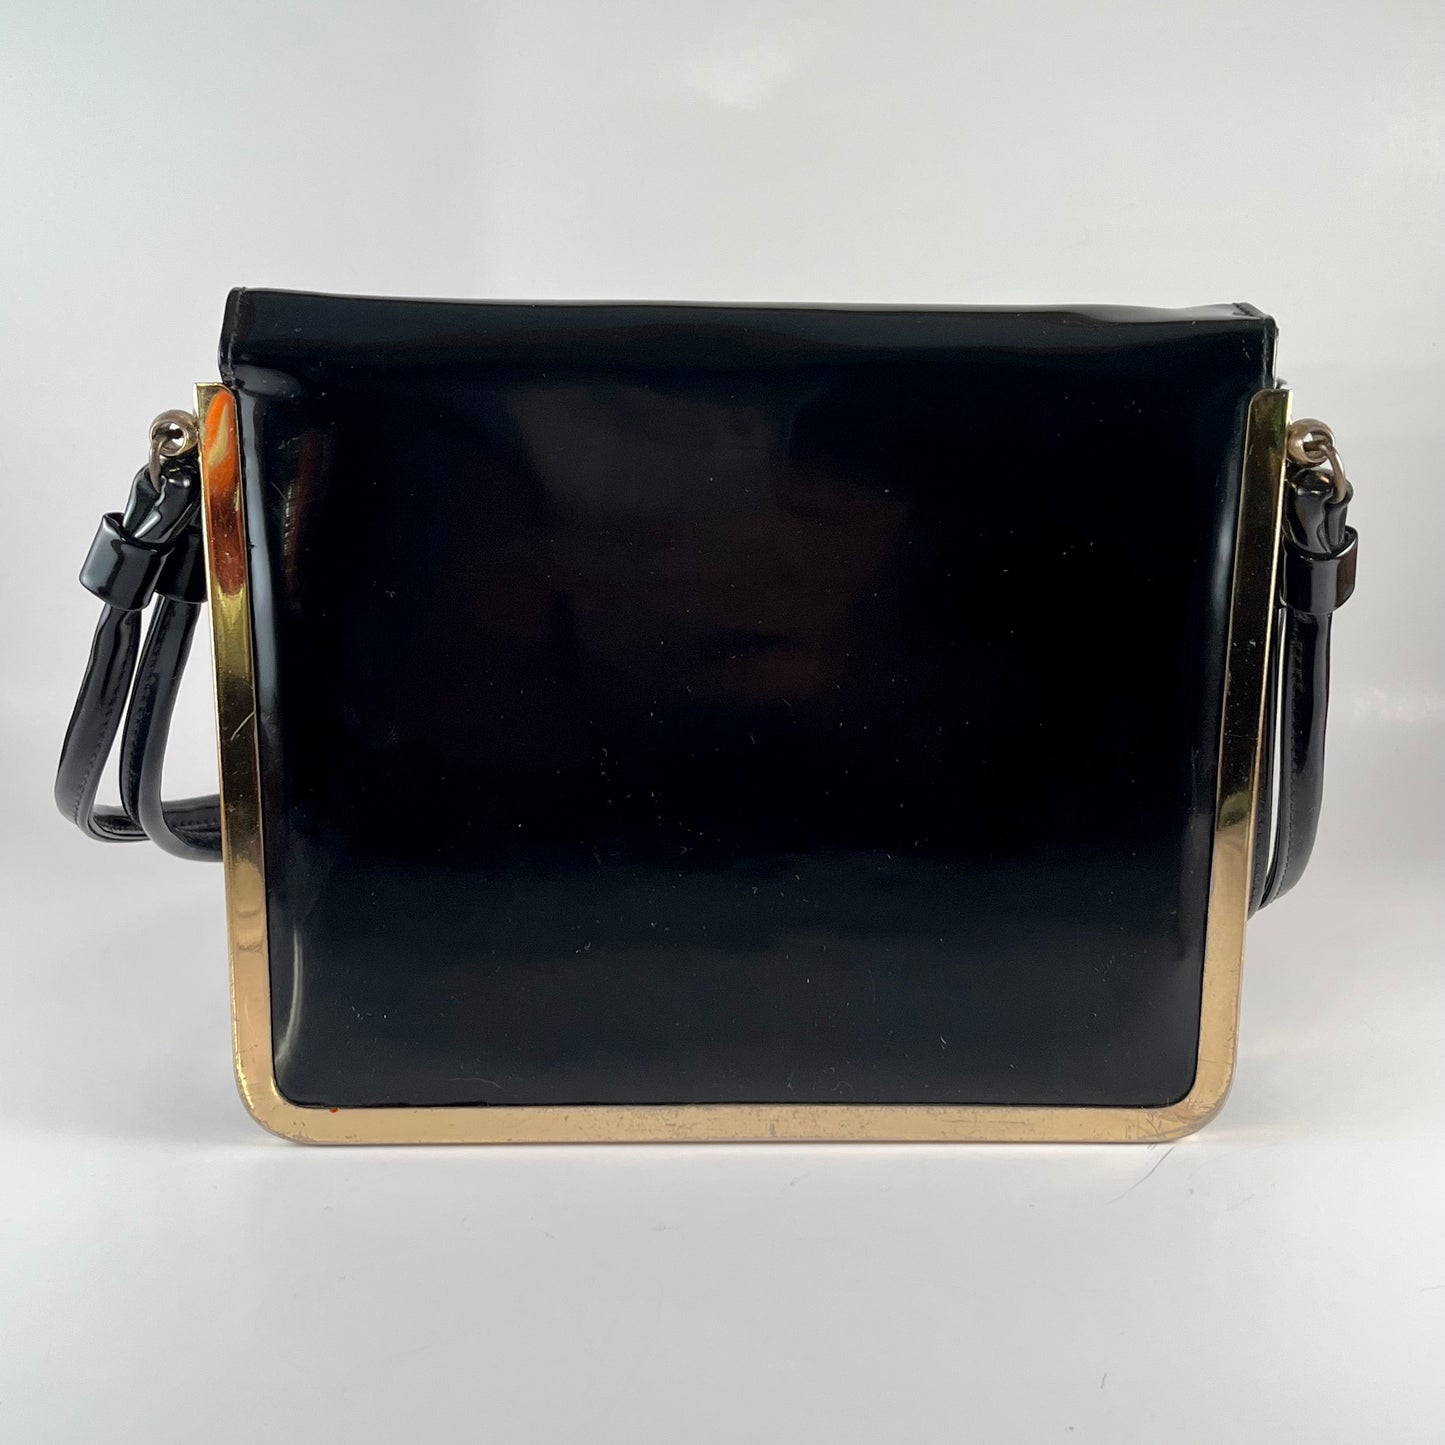 Late 50s/ Early 60s Markay Patent Leather Handbag